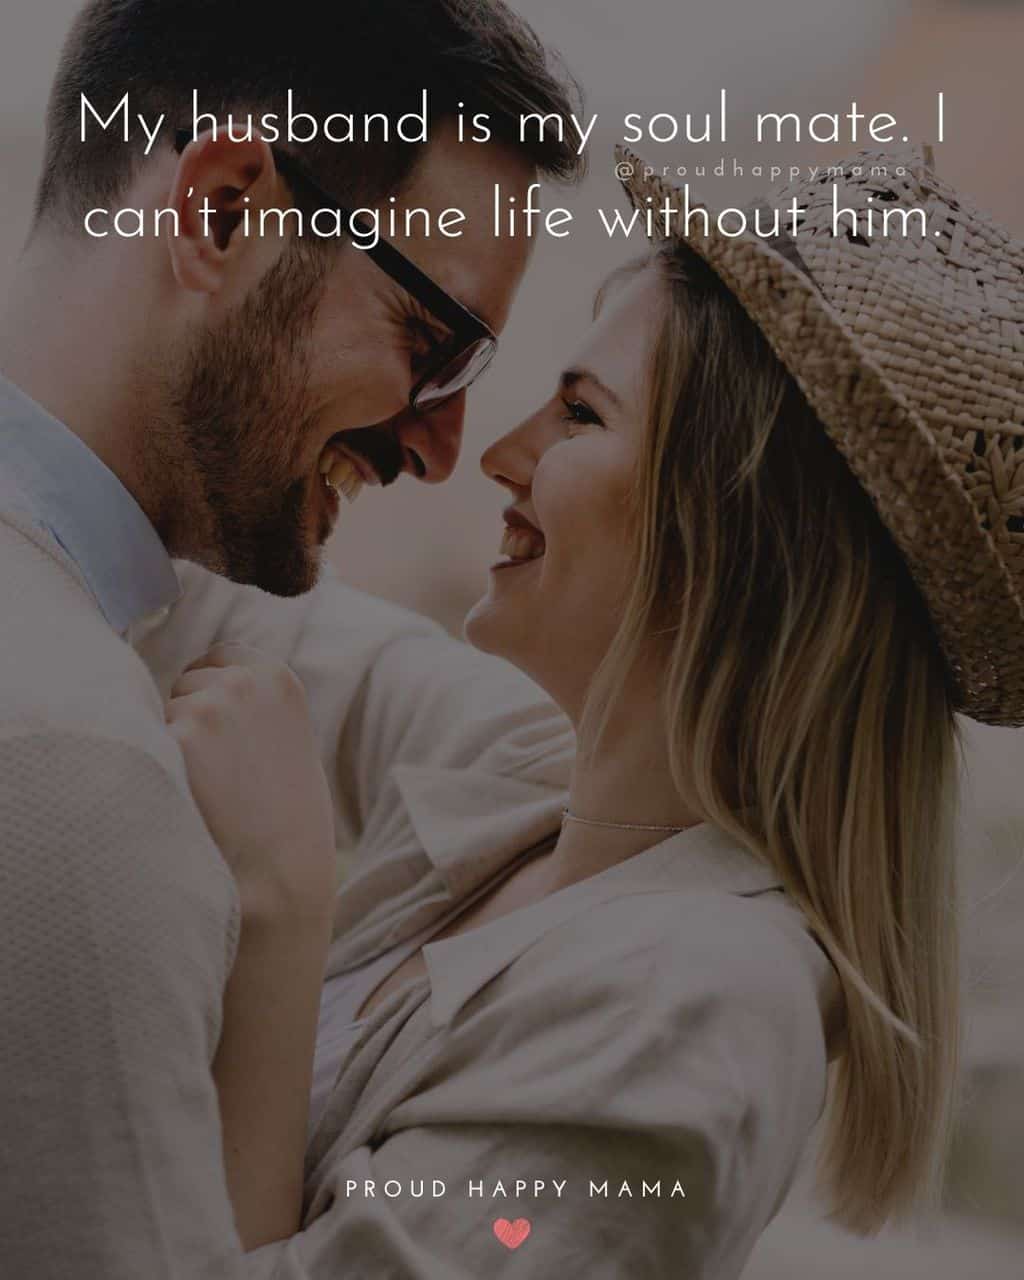 Husband Quotes - My husband is my soul mate. I can’t imagine life without him.’